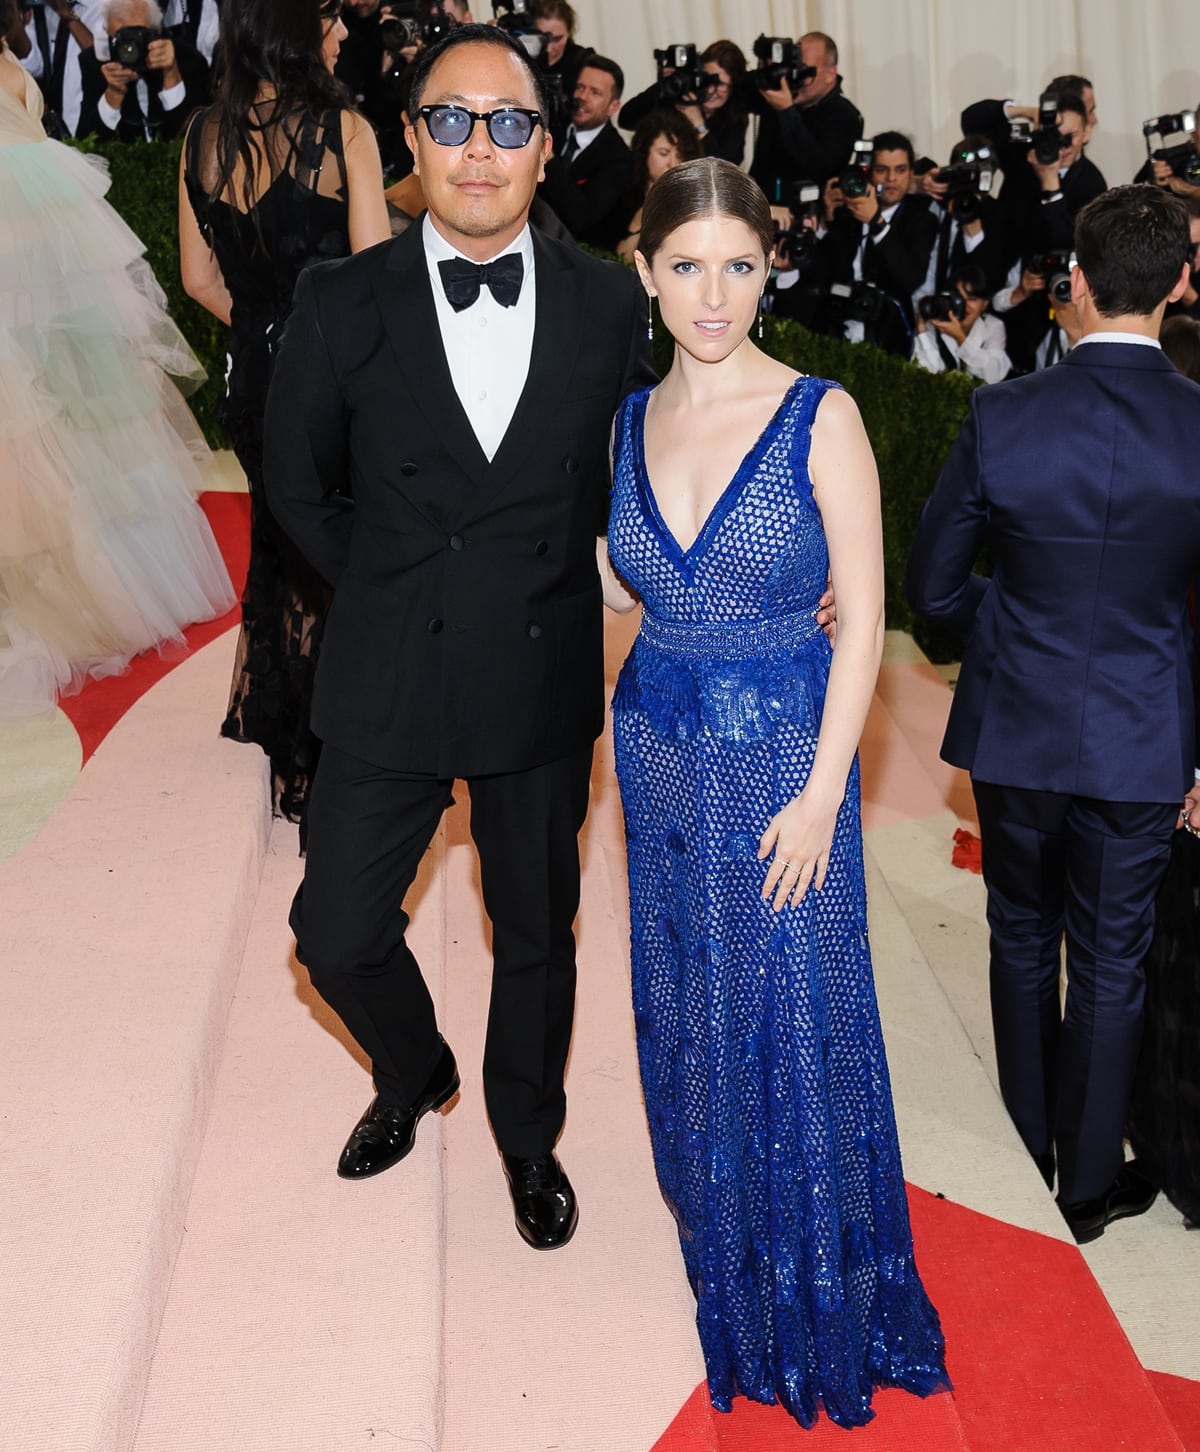 Anna Kendrick (L) and Derek Lam attend the "Manus x Machina: Fashion In An Age Of Technology" Costume Institute Gala